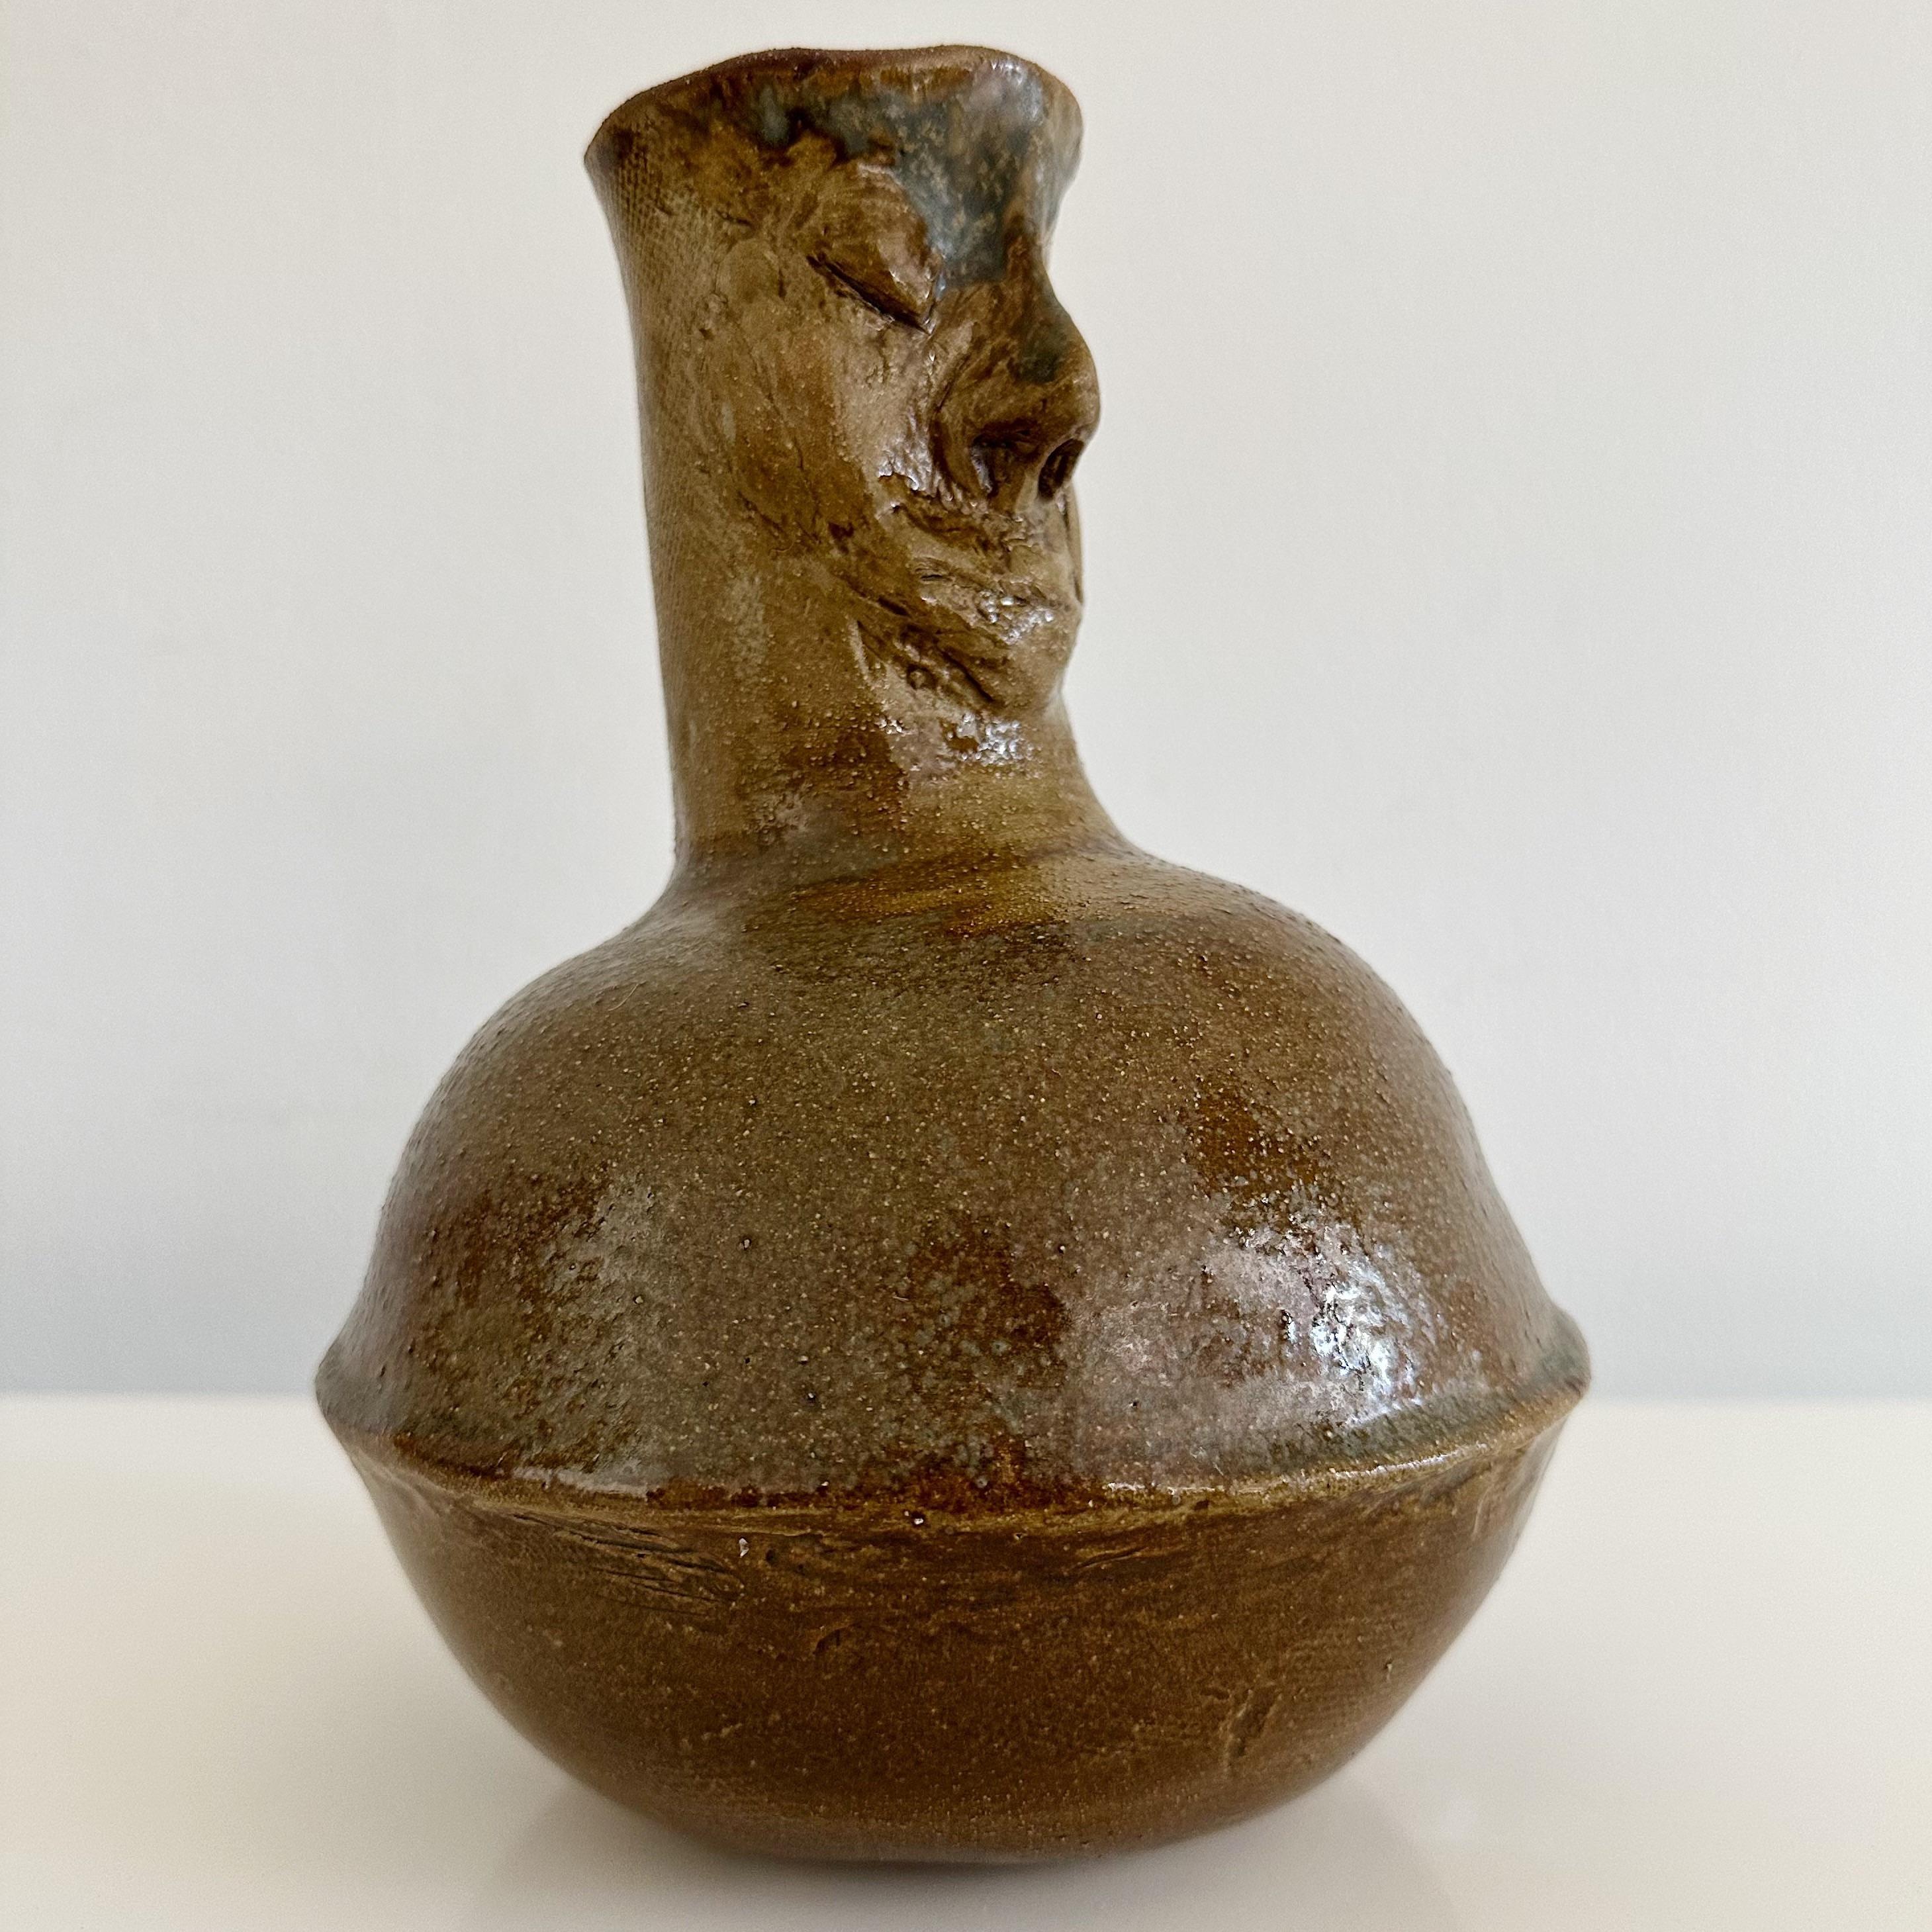 Presenting a unique studio pottery glazed figural handled jug, pitcher or could also be used as a vase. Created by the renowned sculptor Ruth Joffa. This particular signed piece, comes with a distinguished provenance, having been acquired directly